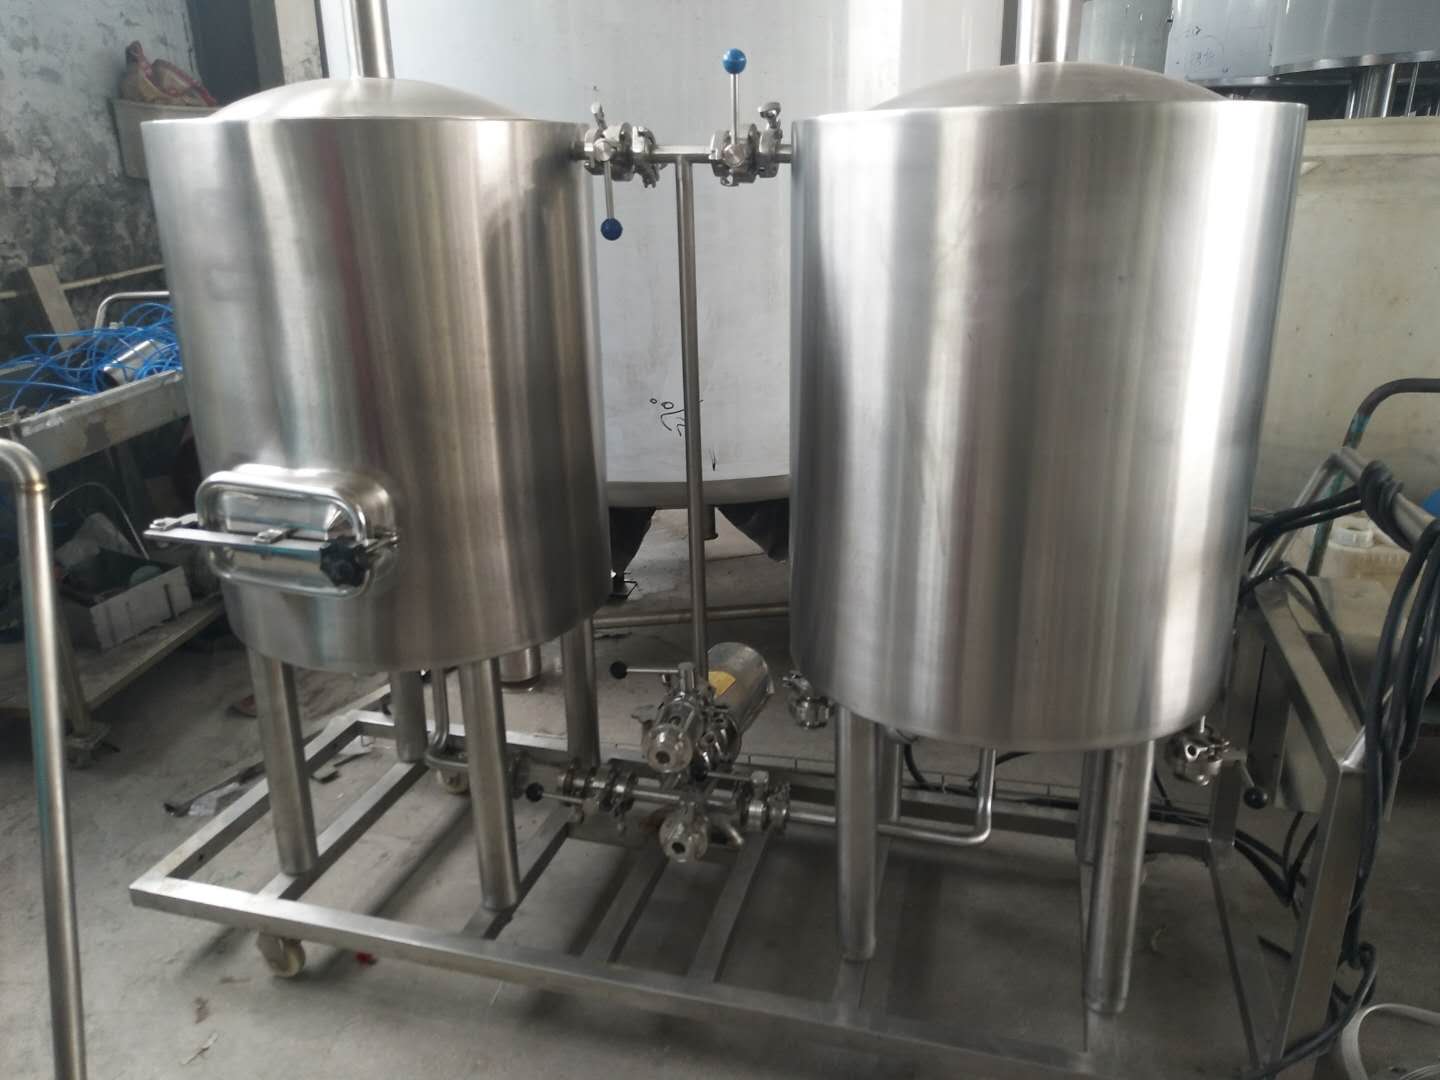 Belgium equipement needed for microbrewery of SUS304 from China manufacturer 2020 W1